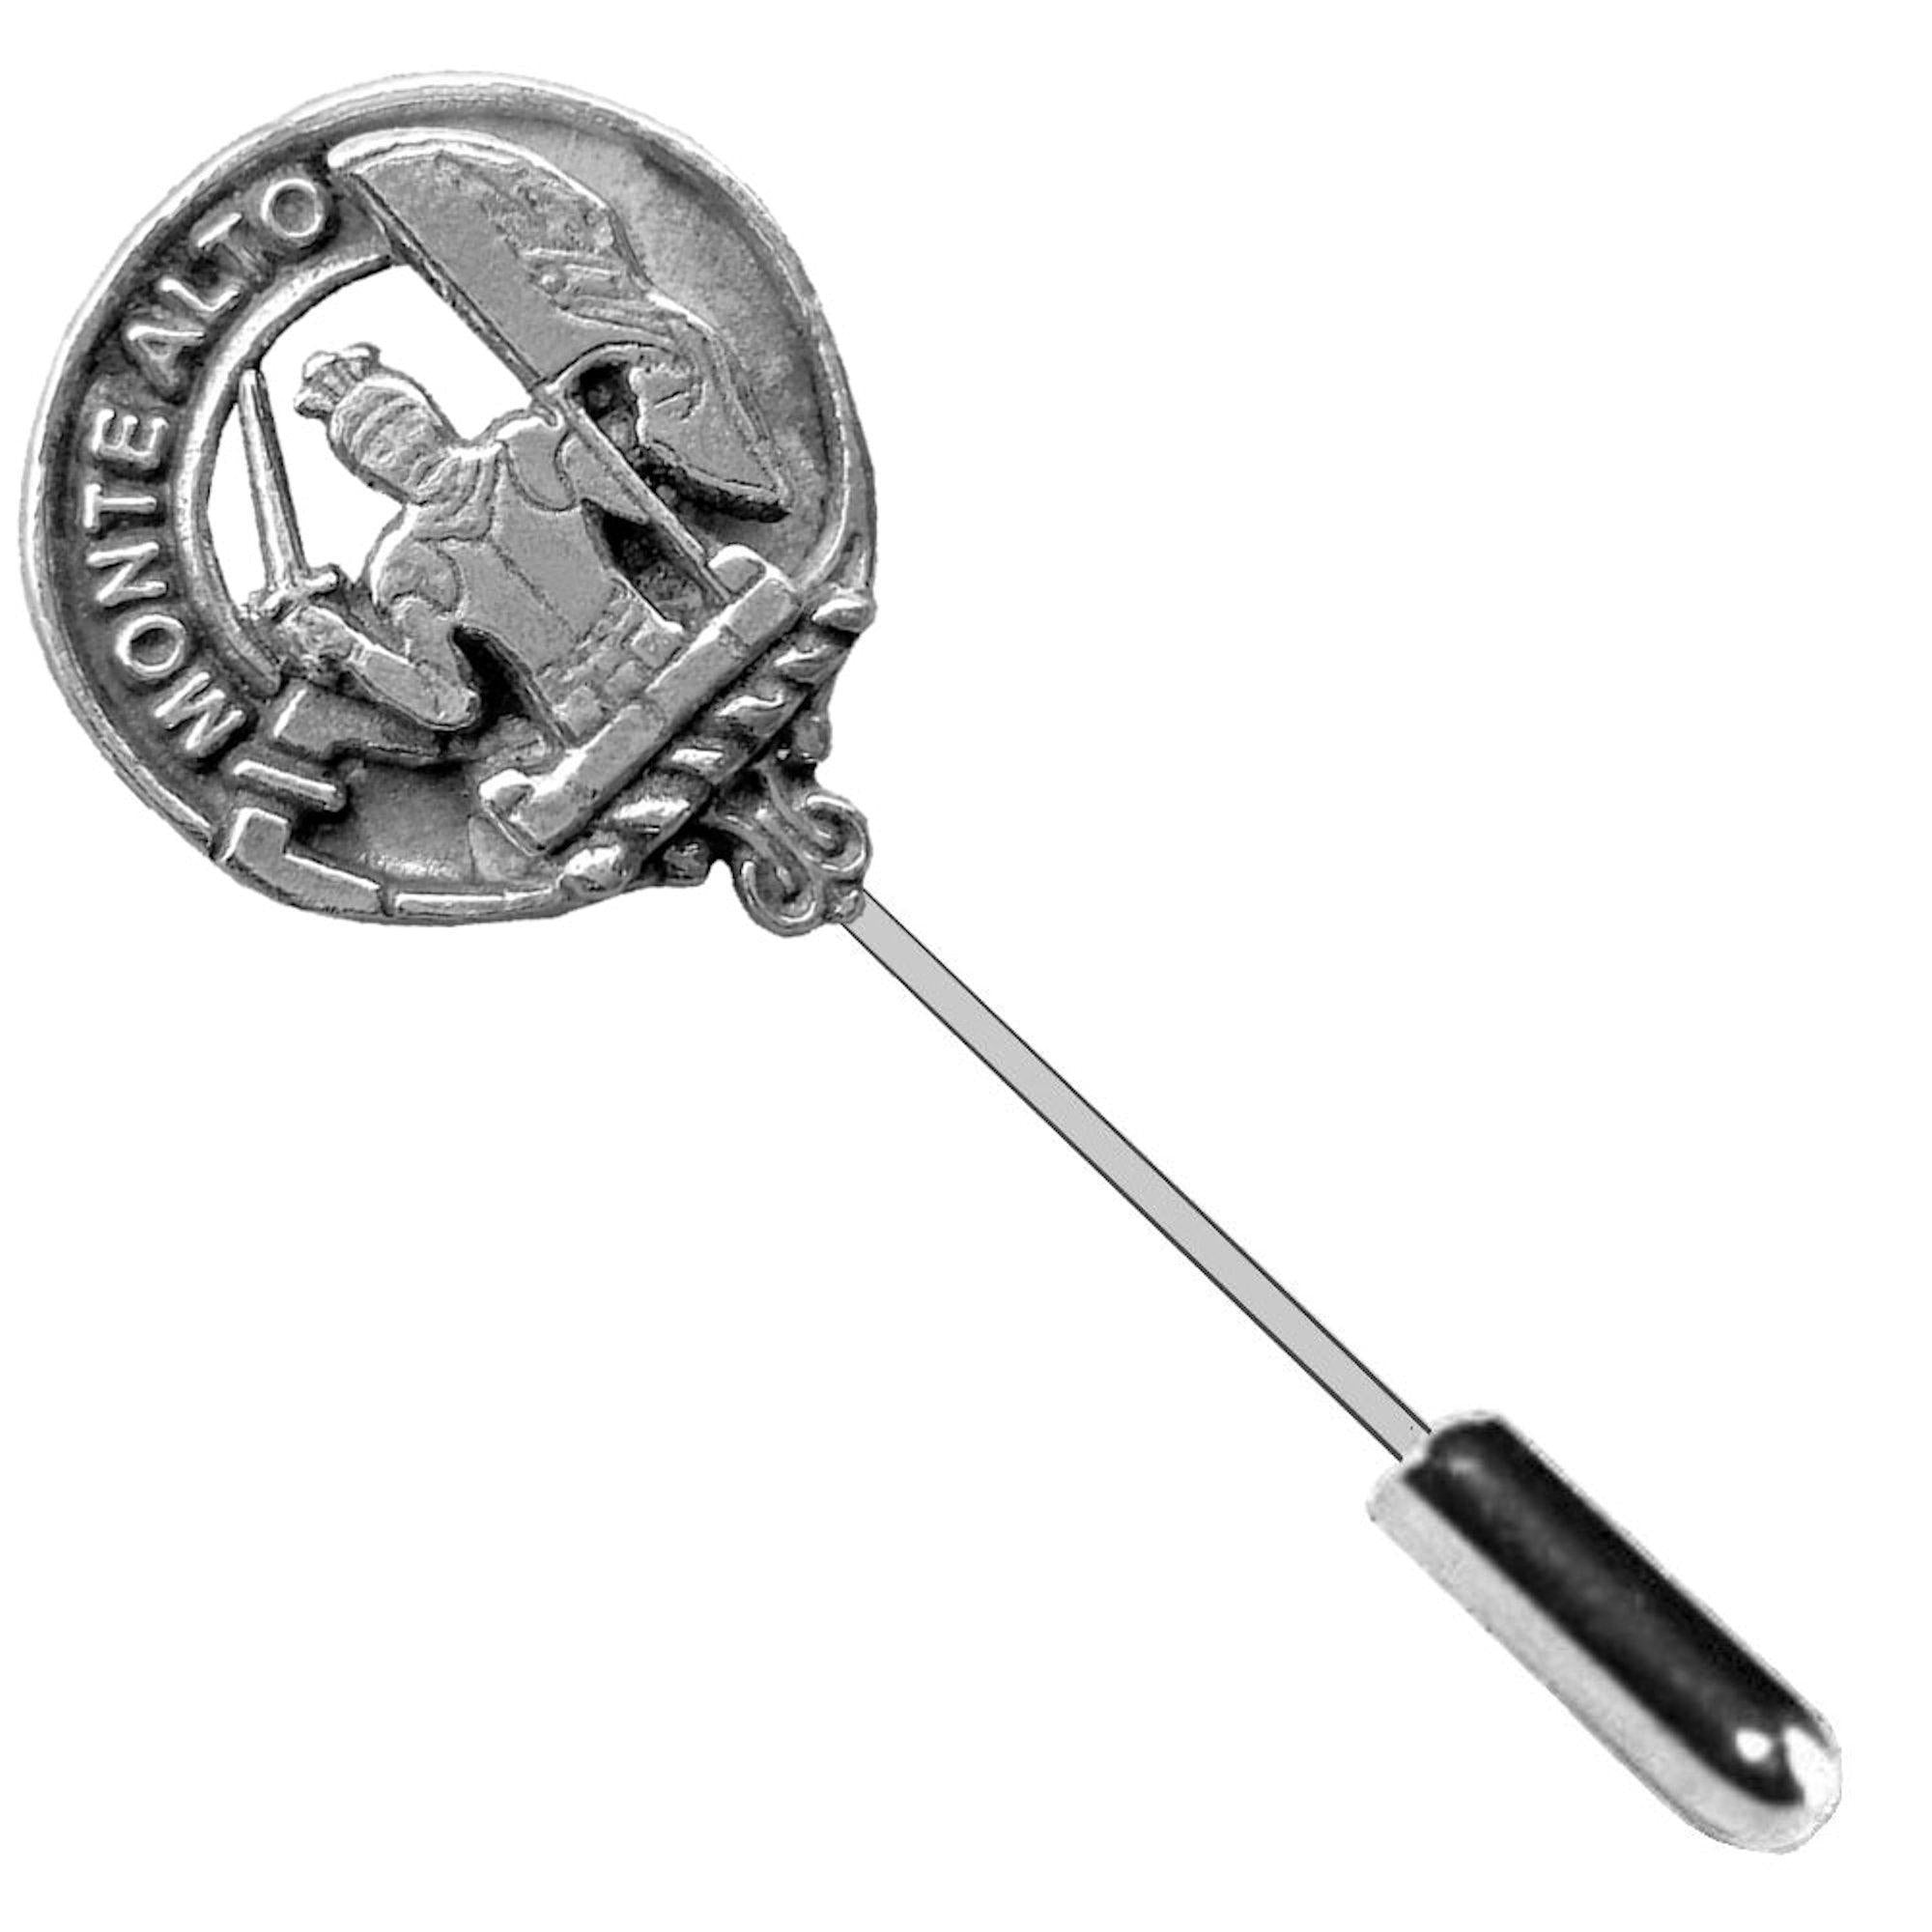 Mowat Clan Crest Stick or Cravat pin, Sterling Silver